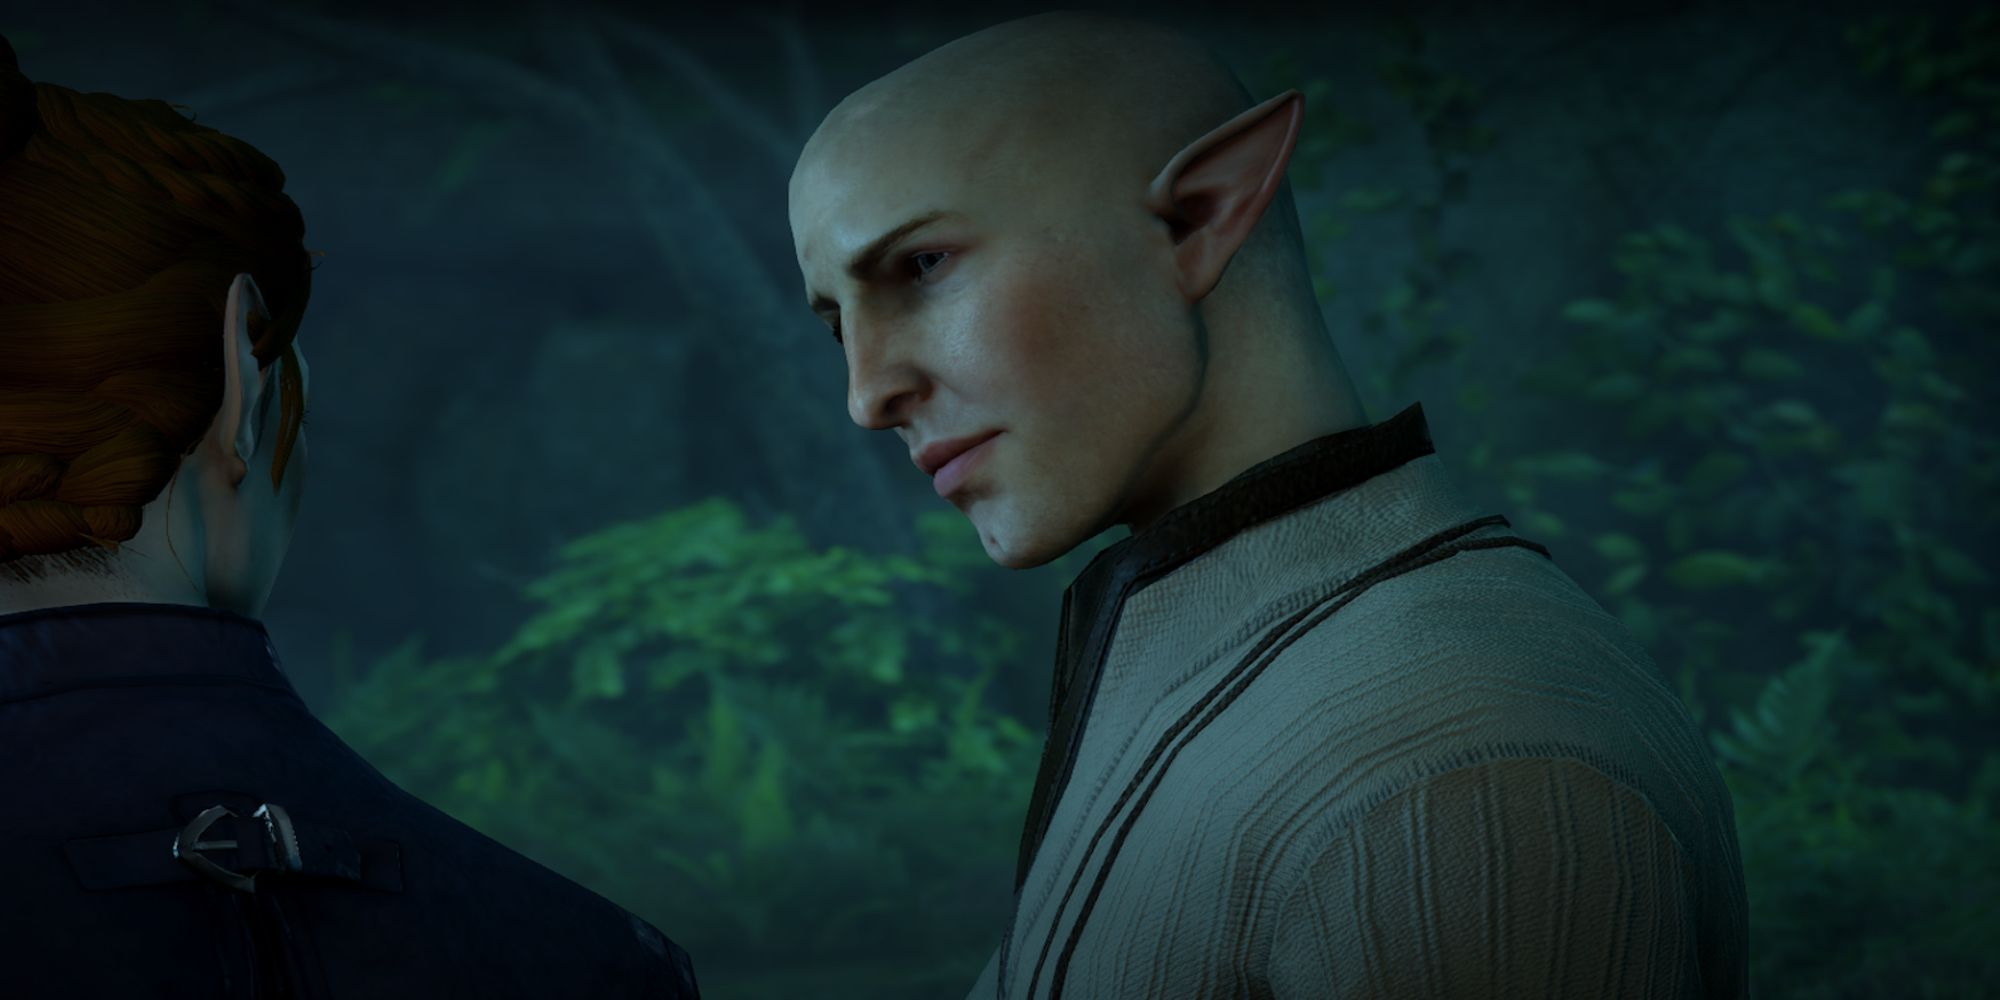 Solas lovingly staring at the Inquisitor (Dragon Age: Inquisition)